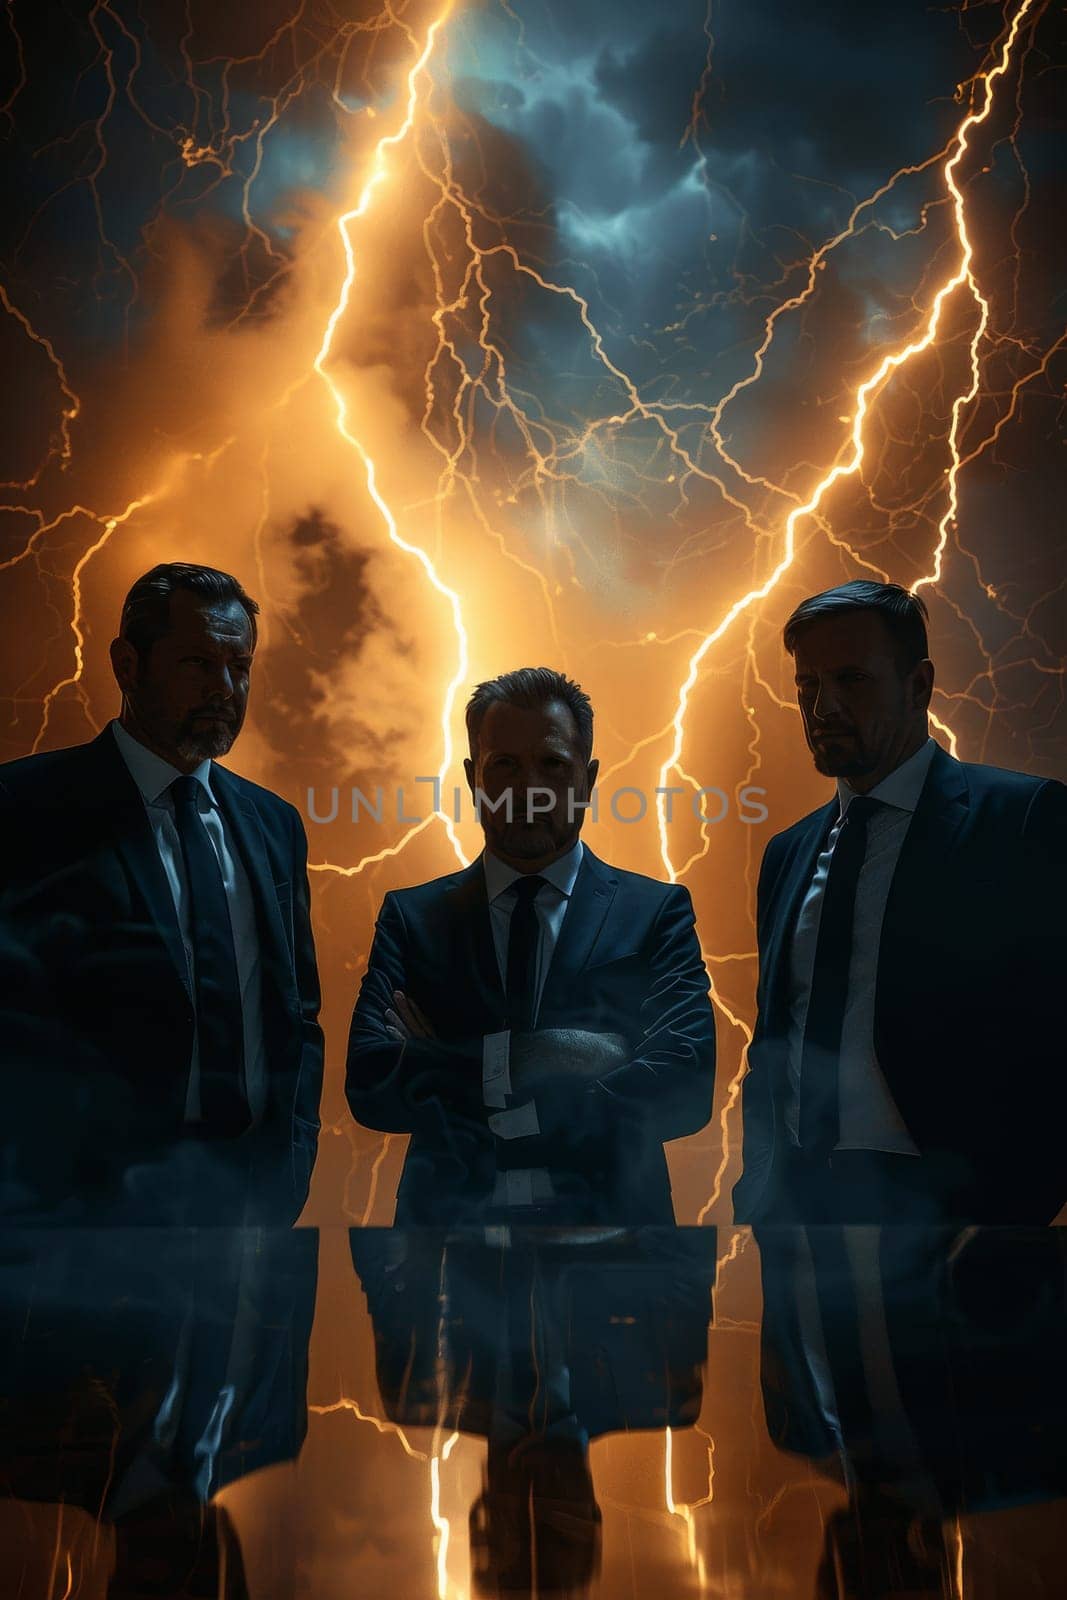 Three men in suits stand in front of a stormy sky with lightning bolts by itchaznong